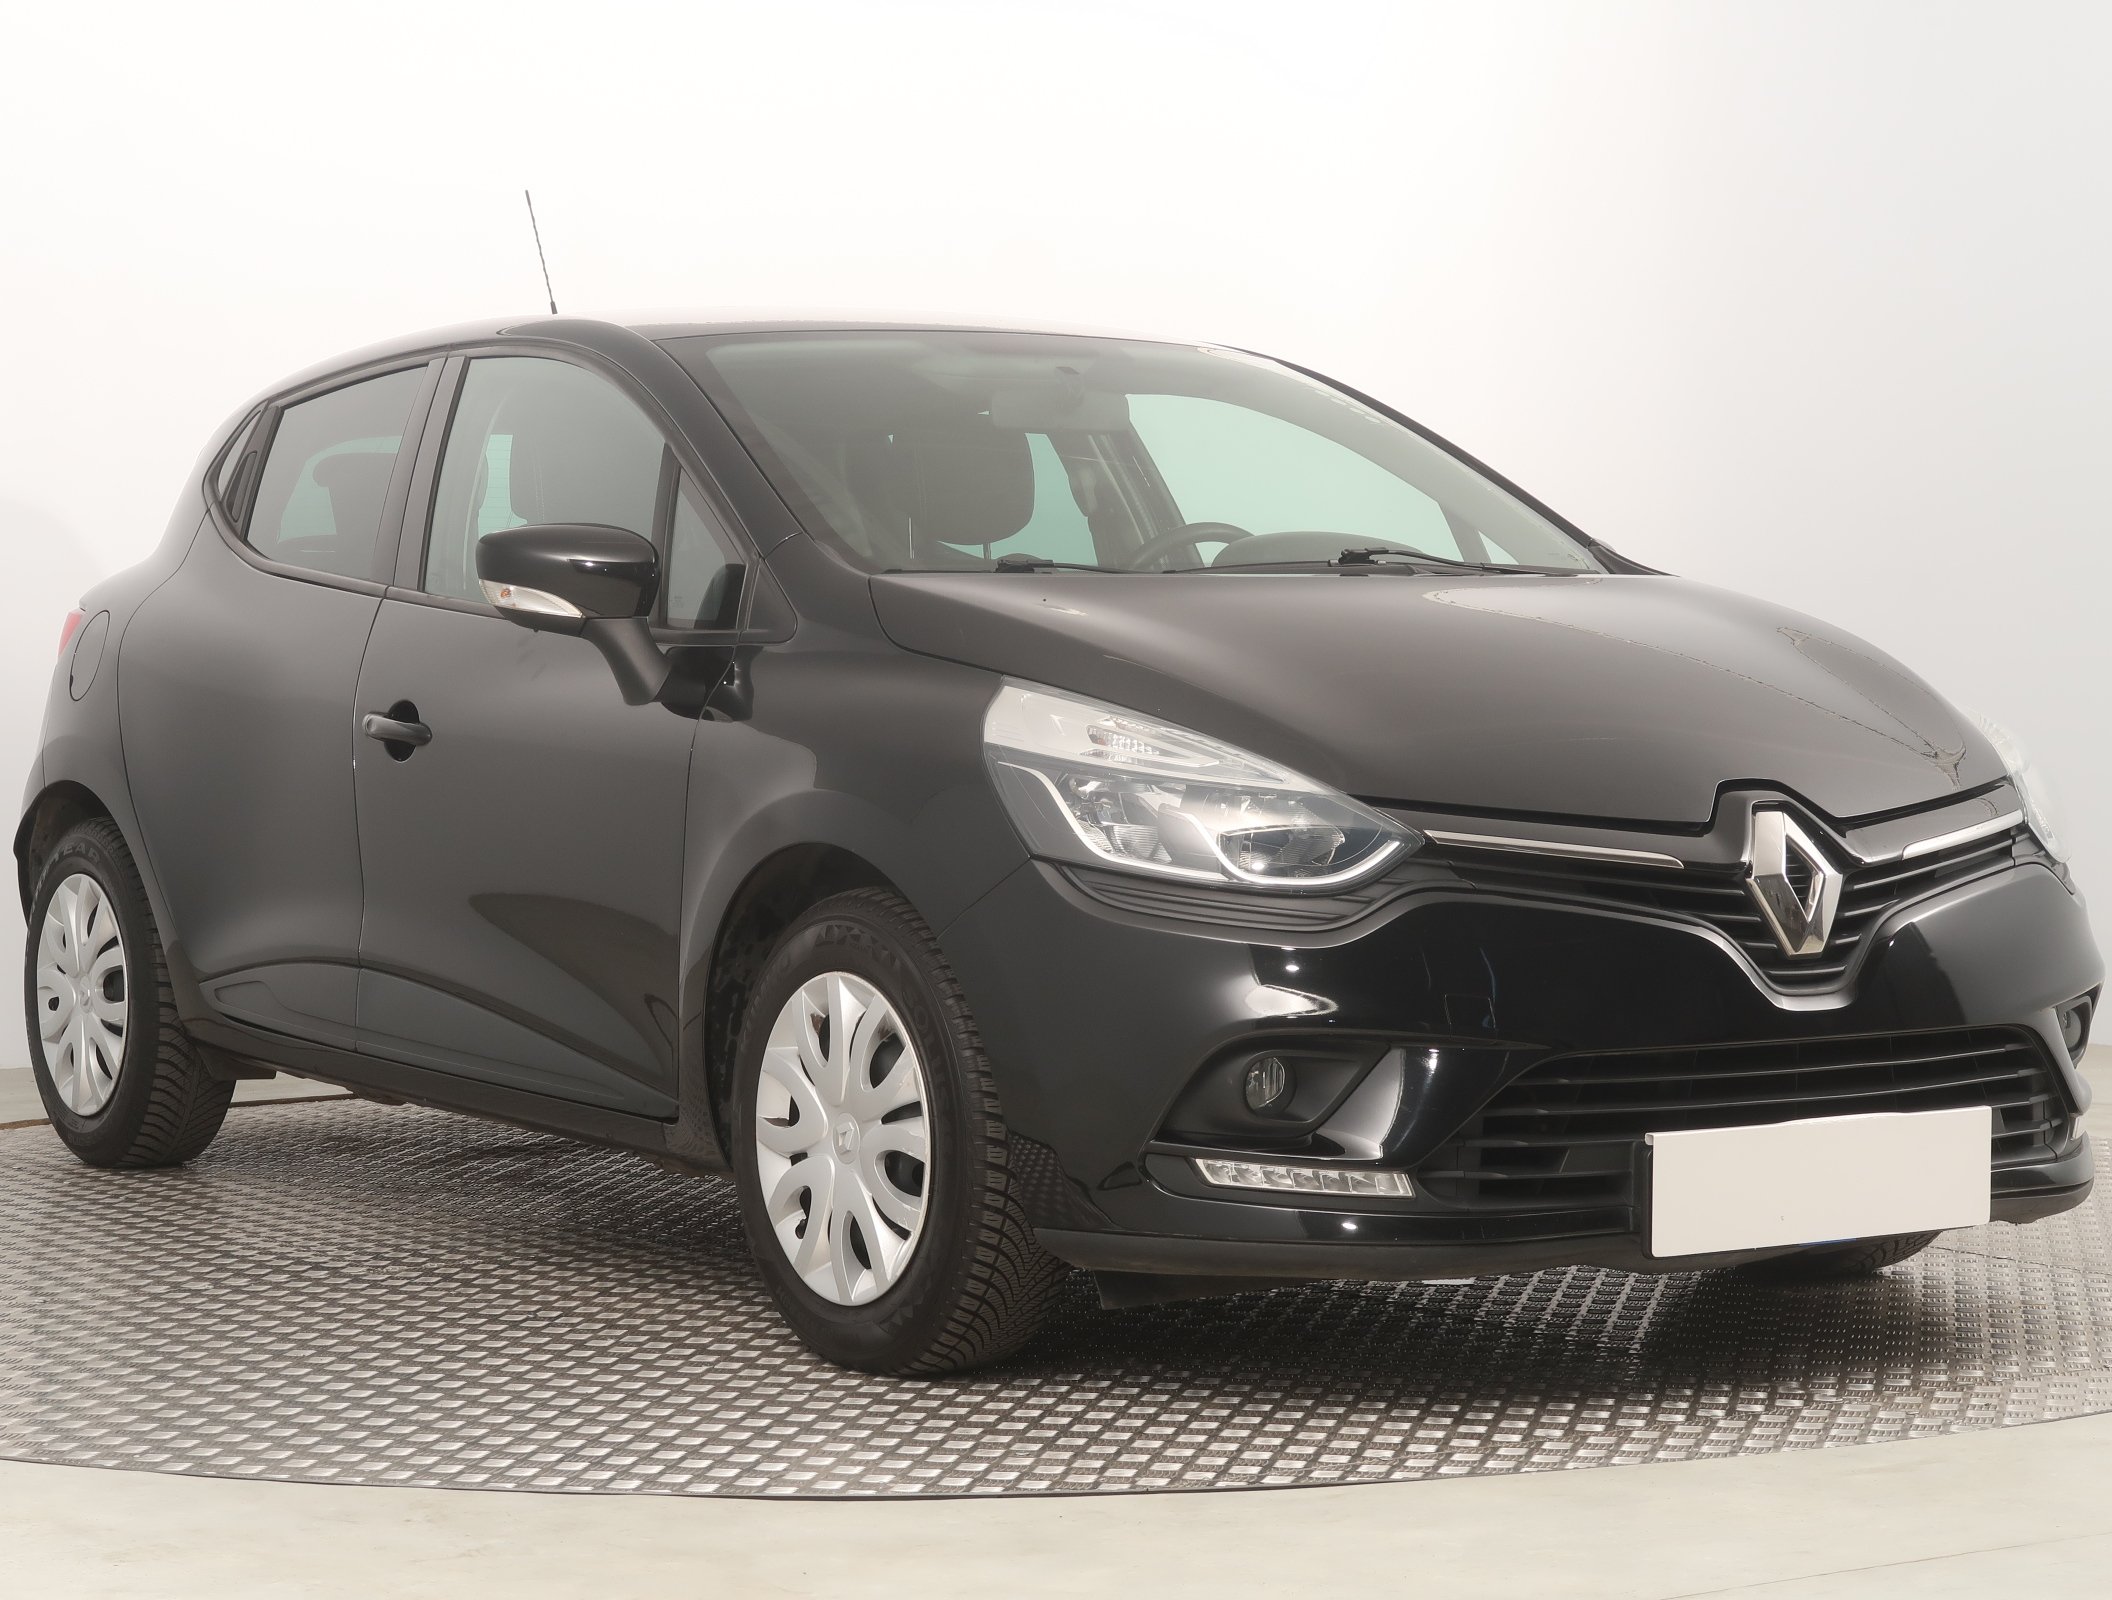 Renault Clio 1.2 TCe Hatchback 2018 - 1